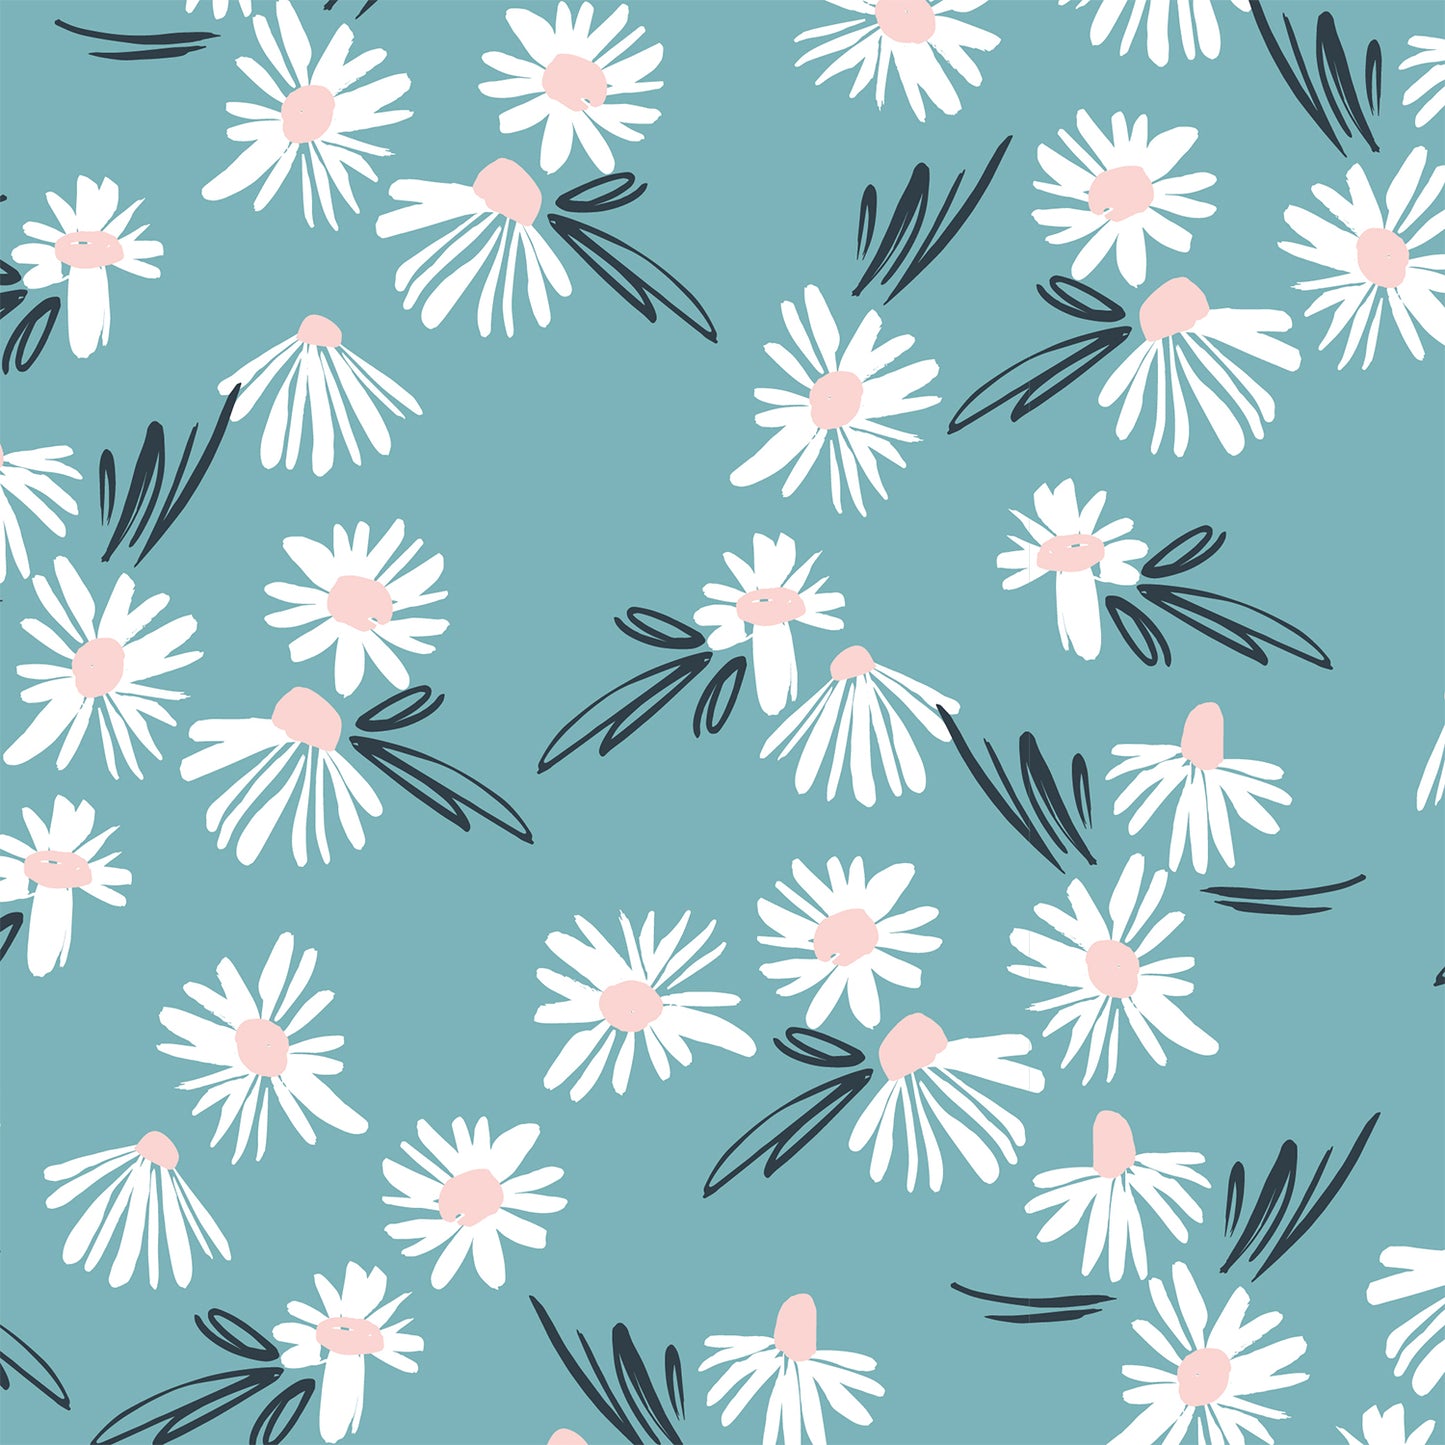 Daisy in Light Blue Flat Wrapping Paper Sheet Wholesale Wraphaholic